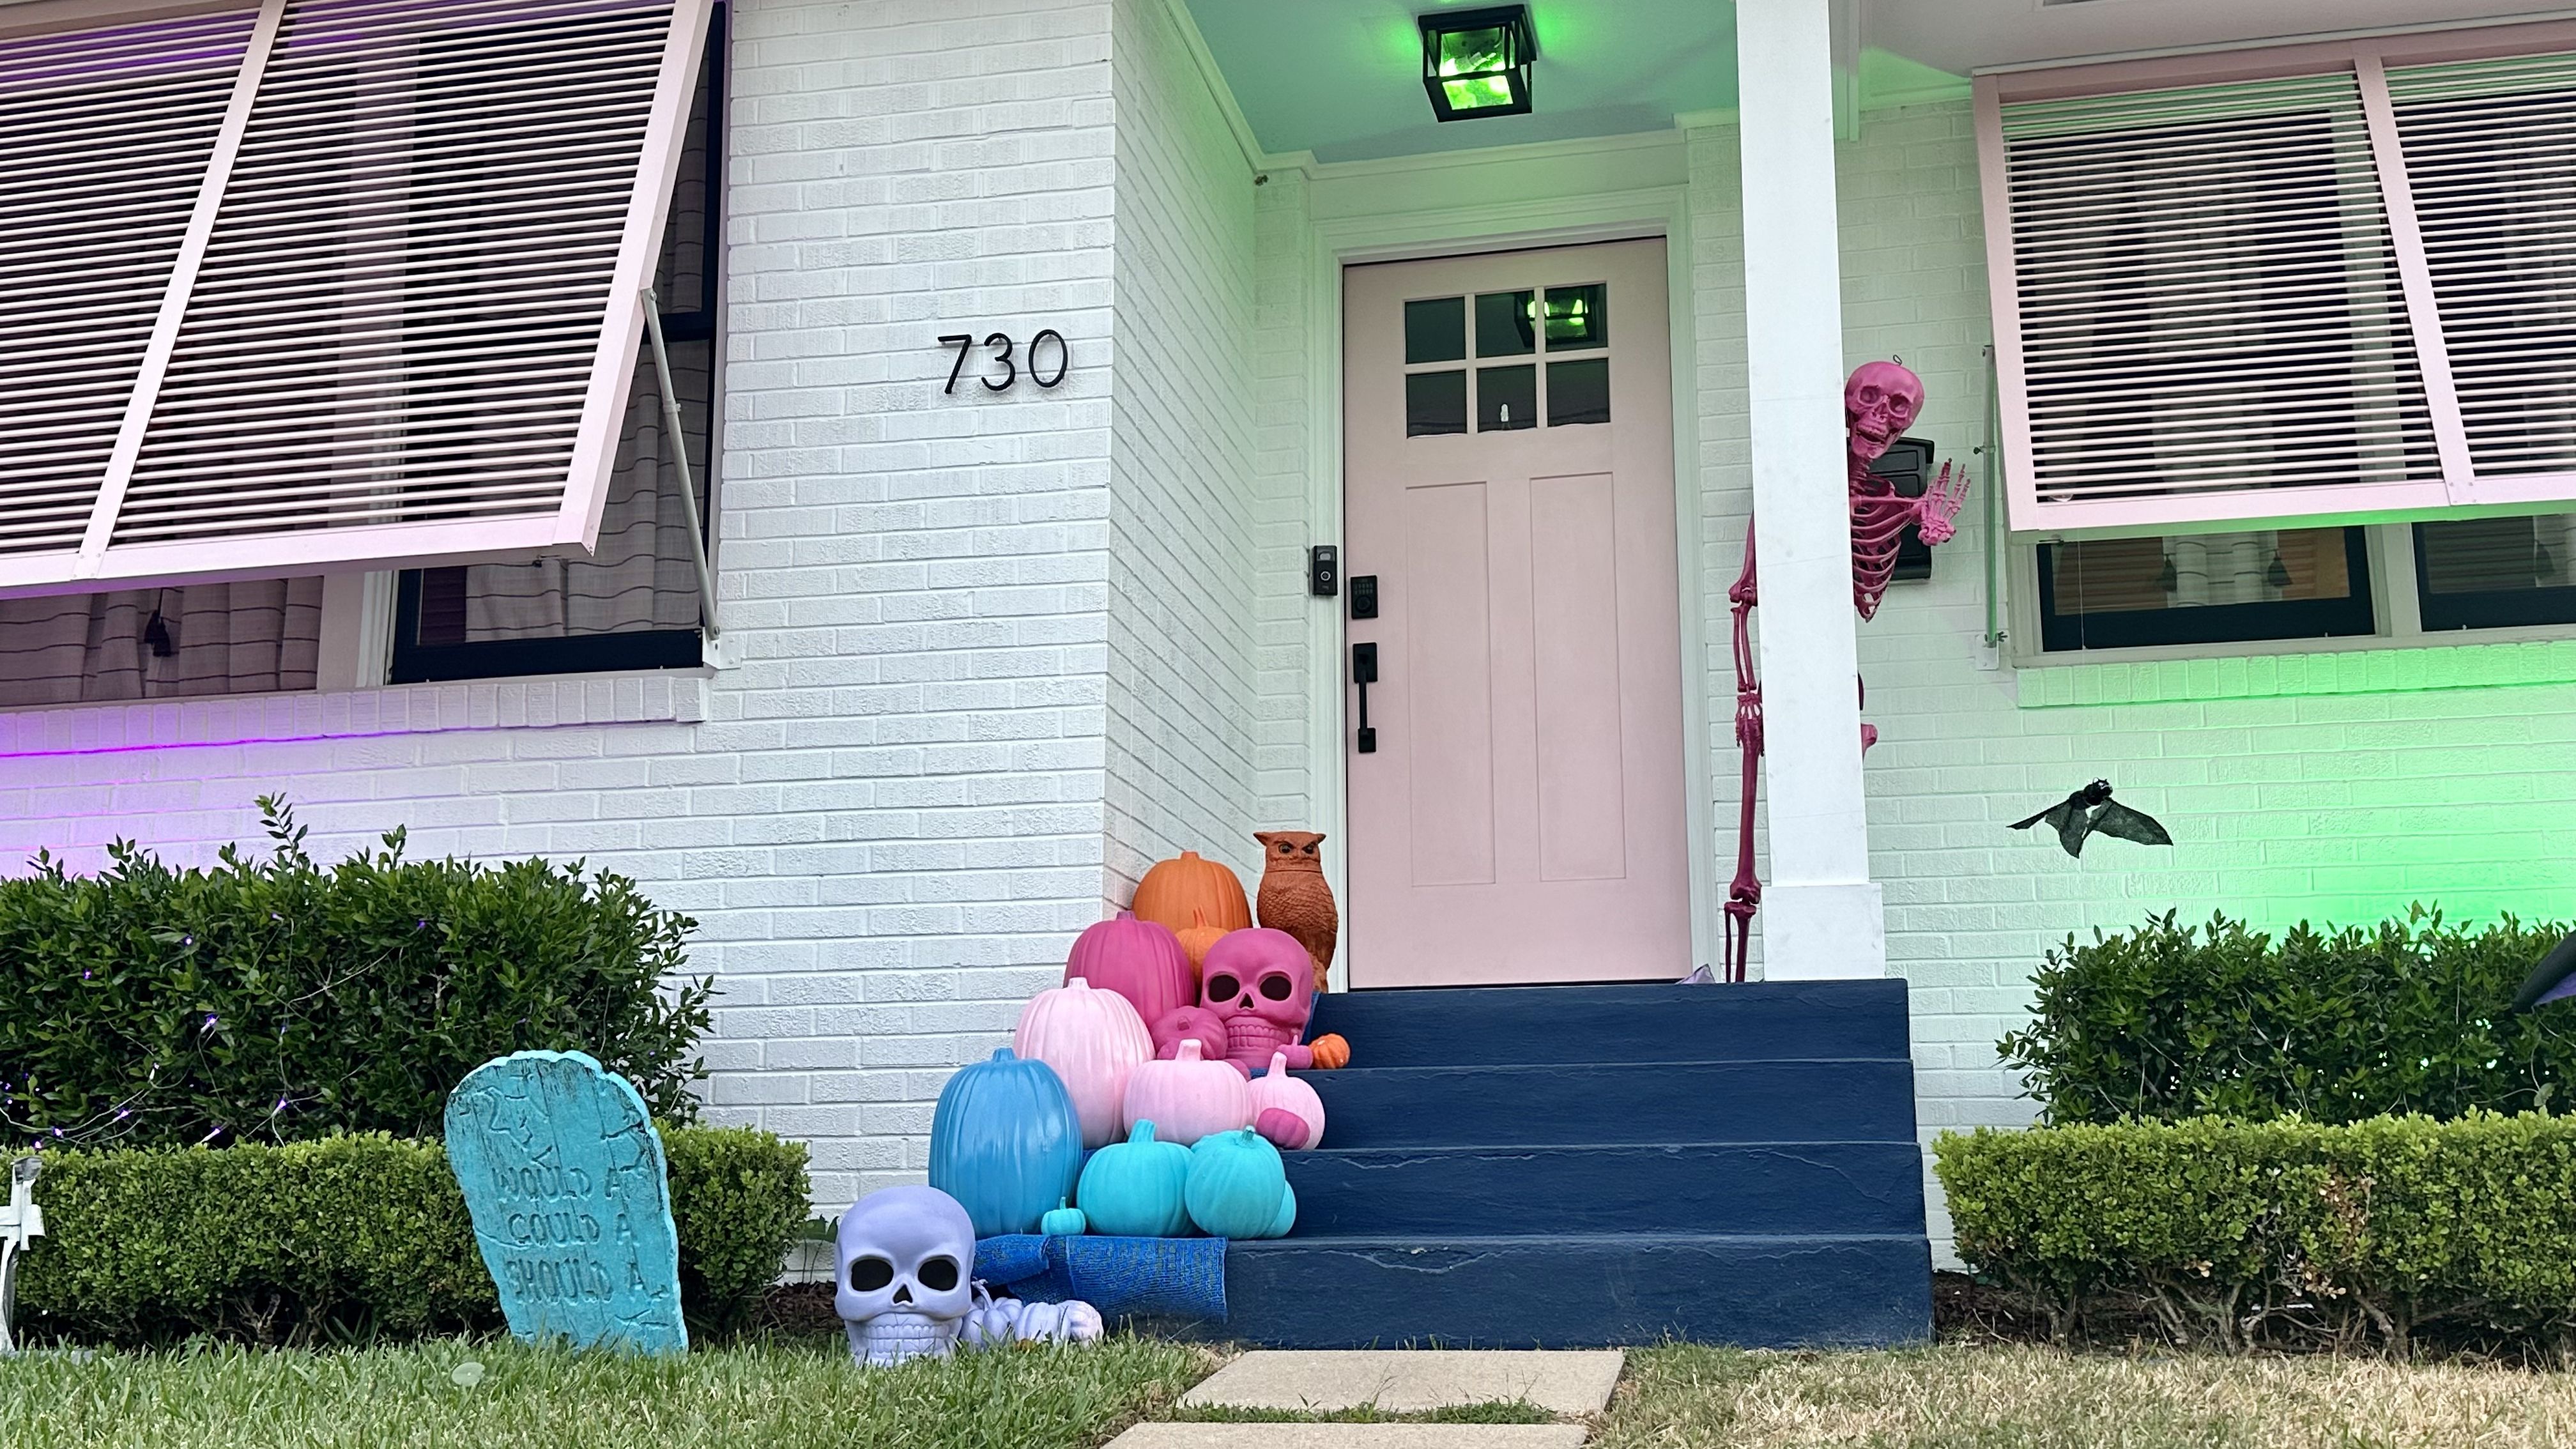 Photo shows a pink skeleton on a porch.